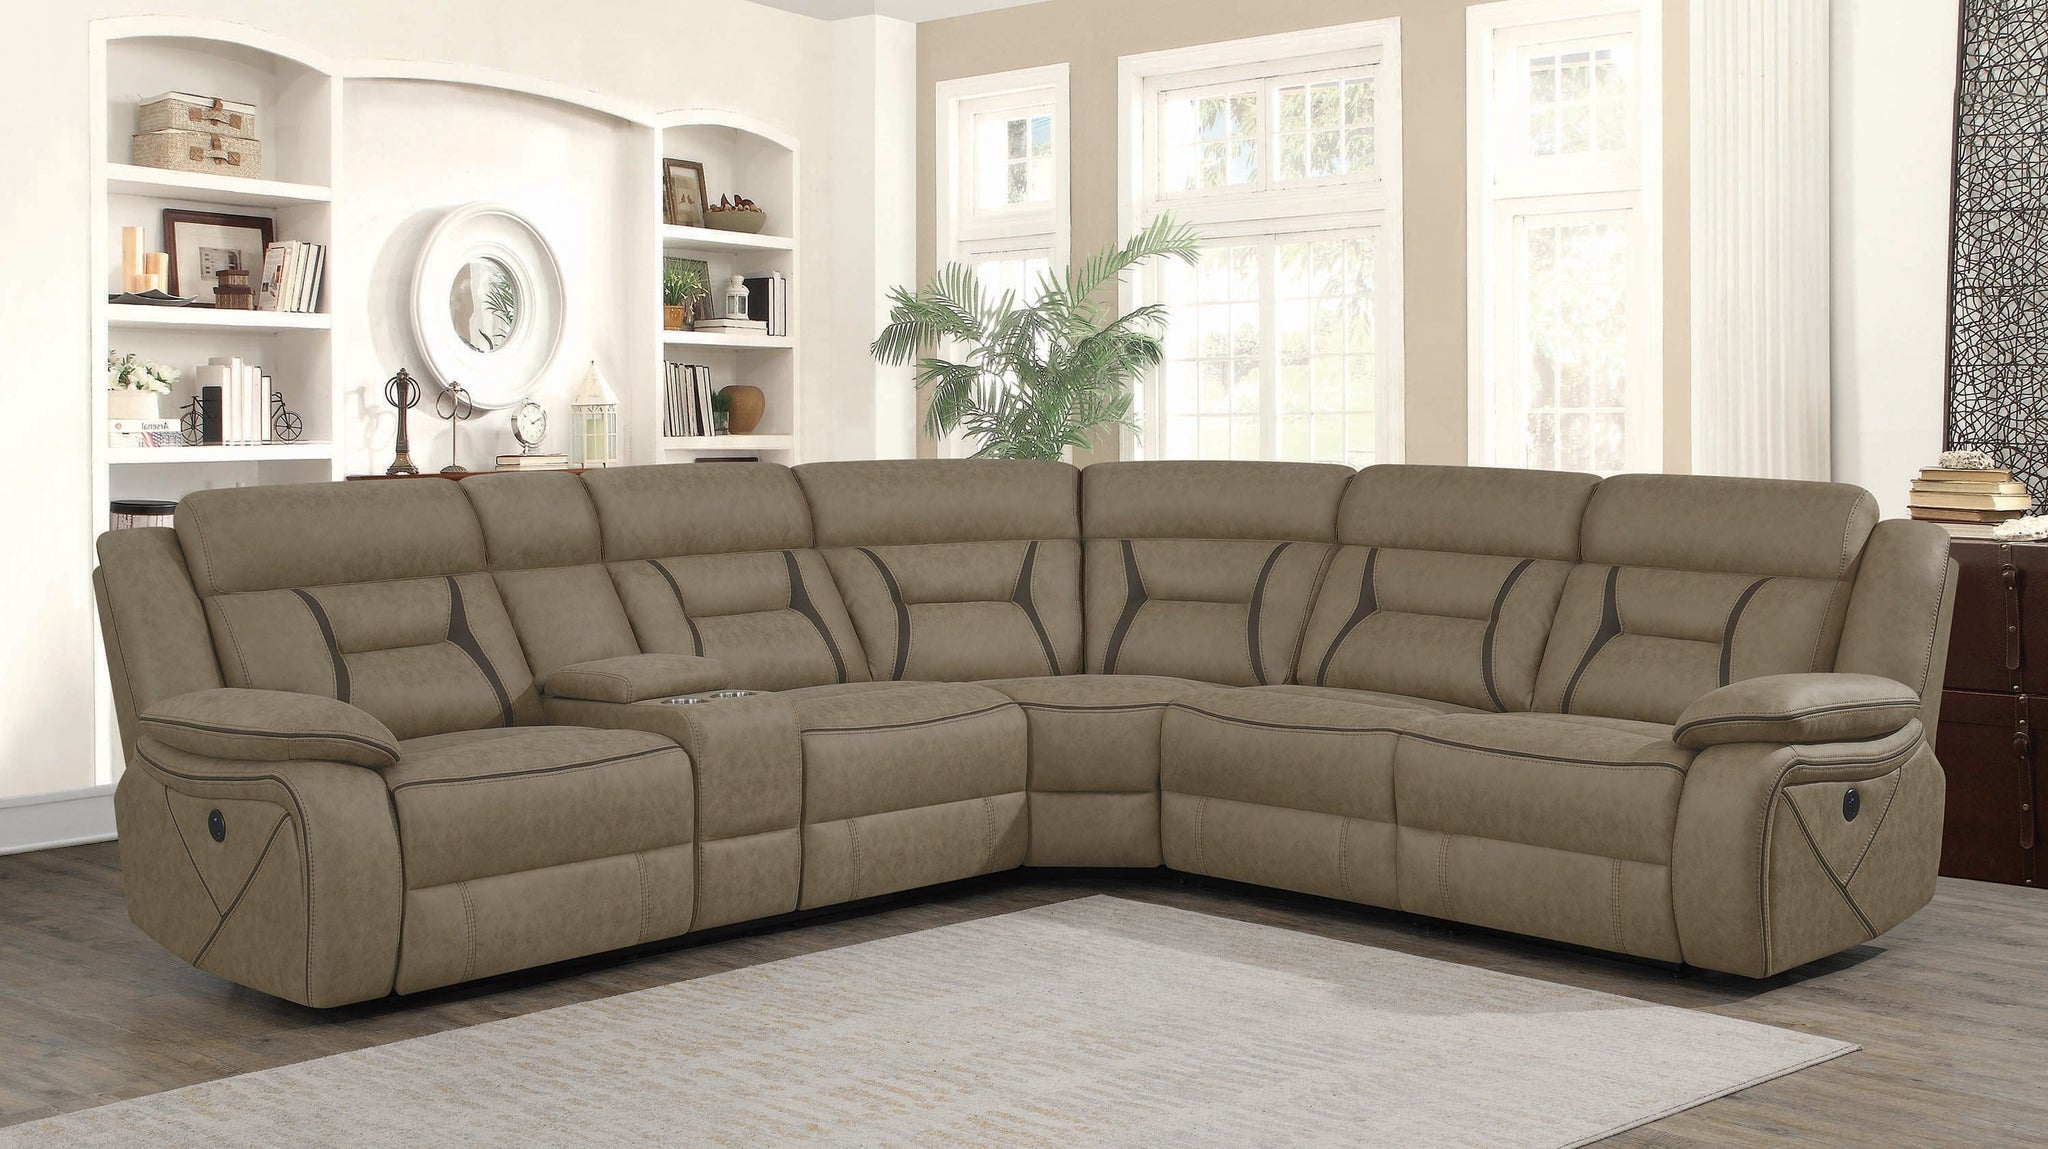 Higgins Four-Piece Upholstered Power Sectional Tan Collection: Higgins SKU: 600380